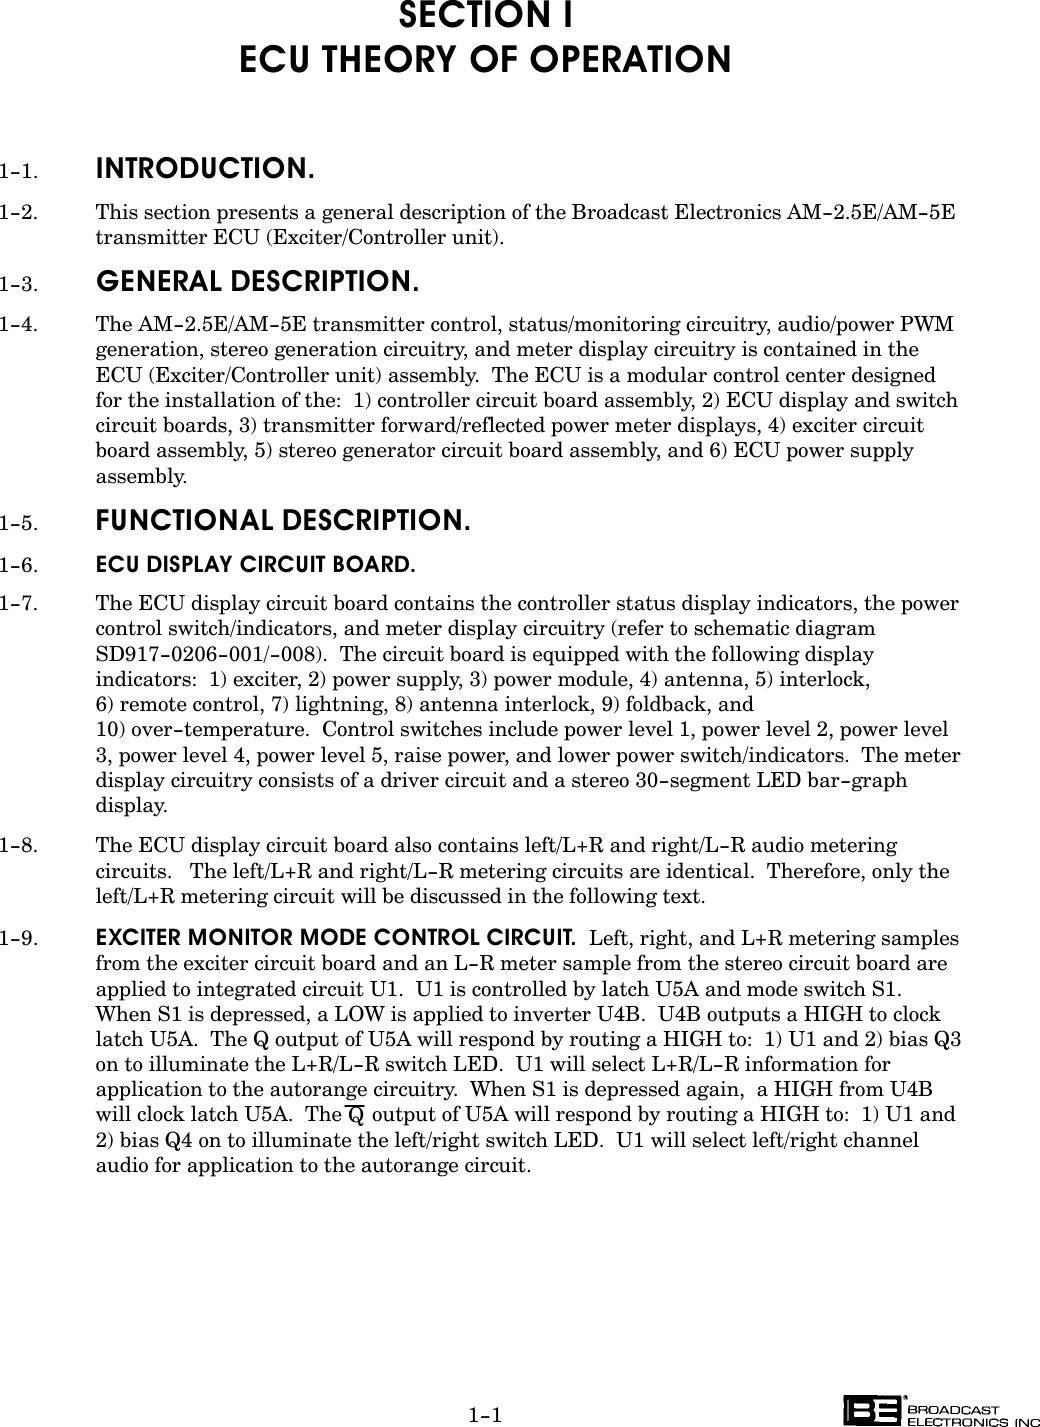 1-1SECTION IECU THEORY OF OPERATION1-1. INTRODUCTION.1-2. This section presents a general description of the Broadcast Electronics AM-2.5E/AM-5Etransmitter ECU (Exciter/Controller unit).1-3. GENERAL DESCRIPTION.1-4. The AM-2.5E/AM-5E transmitter control, status/monitoring circuitry, audio/power PWMgeneration, stereo generation circuitry, and meter display circuitry is contained in theECU (Exciter/Controller unit) assembly.  The ECU is a modular control center designed for the installation of the:  1) controller circuit board assembly, 2) ECU display and switchcircuit boards, 3) transmitter forward/reflected power meter displays, 4) exciter circuitboard assembly, 5) stereo generator circuit board assembly, and 6) ECU power supplyassembly.1-5. FUNCTIONAL DESCRIPTION.1-6. ECU DISPLAY CIRCUIT BOARD.1-7. The ECU display circuit board contains the controller status display indicators, the powercontrol switch/indicators, and meter display circuitry (refer to schematic diagramSD917-0206-001/-008).  The circuit board is equipped with the following displayindicators:  1) exciter, 2) power supply, 3) power module, 4) antenna, 5) interlock, 6) remote control, 7) lightning, 8) antenna interlock, 9) foldback, and 10) over-temperature.  Control switches include power level 1, power level 2, power level3, power level 4, power level 5, raise power, and lower power switch/indicators.  The meterdisplay circuitry consists of a driver circuit and a stereo 30-segment LED bar-graphdisplay.1-8. The ECU display circuit board also contains left/L+R and right/L-R audio meteringcircuits.   The left/L+R and right/L-R metering circuits are identical.  Therefore, only theleft/L+R metering circuit will be discussed in the following text.1-9. EXCITER MONITOR MODE CONTROL CIRCUIT.  Left, right, and L+R metering samplesfrom the exciter circuit board and an L-R meter sample from the stereo circuit board areapplied to integrated circuit U1.  U1 is controlled by latch U5A and mode switch S1.When S1 is depressed, a LOW is applied to inverter U4B.  U4B outputs a HIGH to clocklatch U5A.  The Q output of U5A will respond by routing a HIGH to:  1) U1 and 2) bias Q3on to illuminate the L+R/L-R switch LED.  U1 will select L+R/L-R information forapplication to the autorange circuitry.  When S1 is depressed again,  a HIGH from U4Bwill clock latch U5A.  The Qoutput of U5A will respond by routing a HIGH to:  1) U1 and2) bias Q4 on to illuminate the left/right switch LED.  U1 will select left/right channelaudio for application to the autorange circuit.  